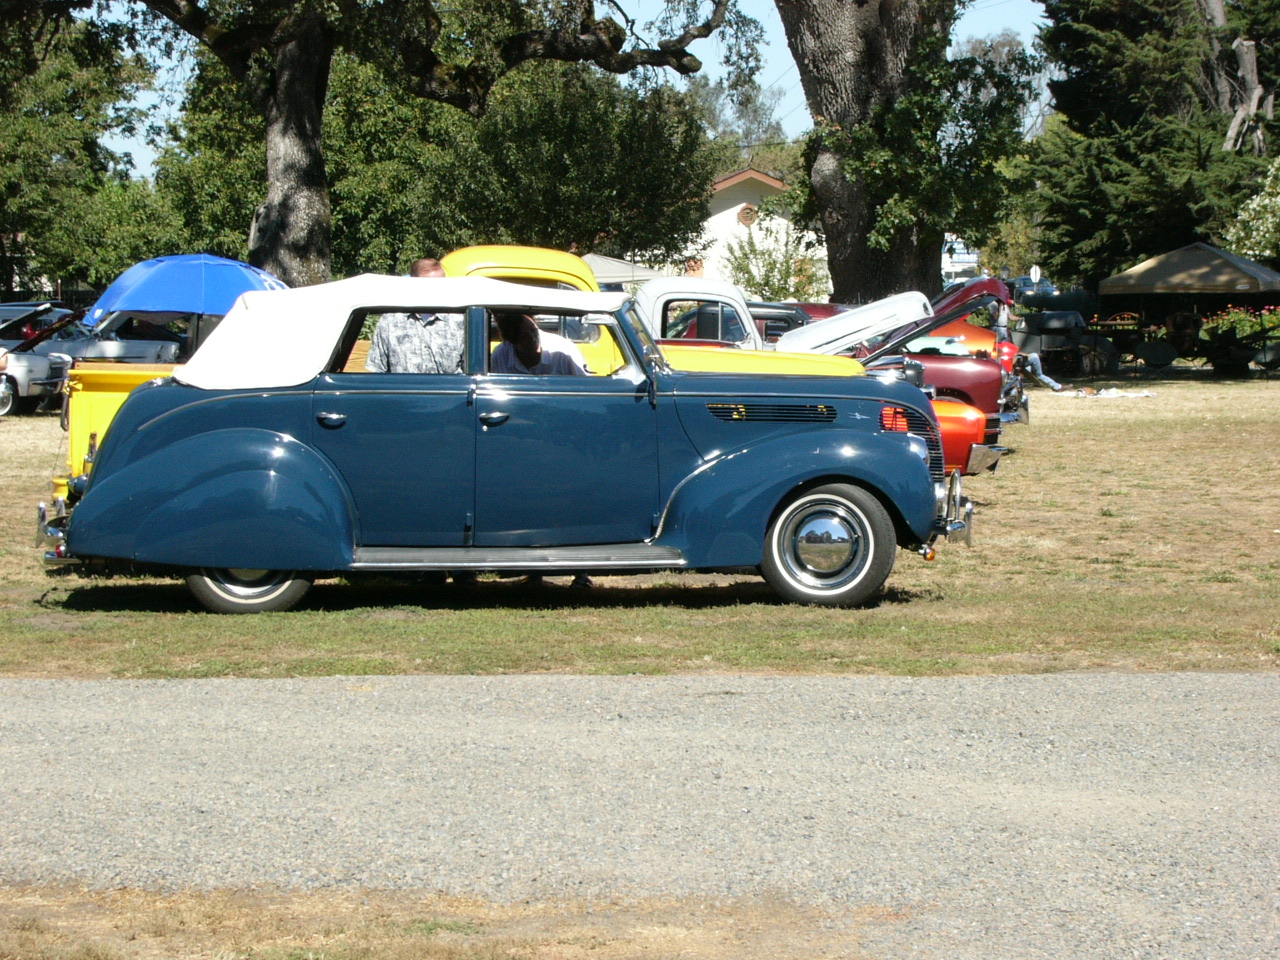 1938 Ford four door ragtop by